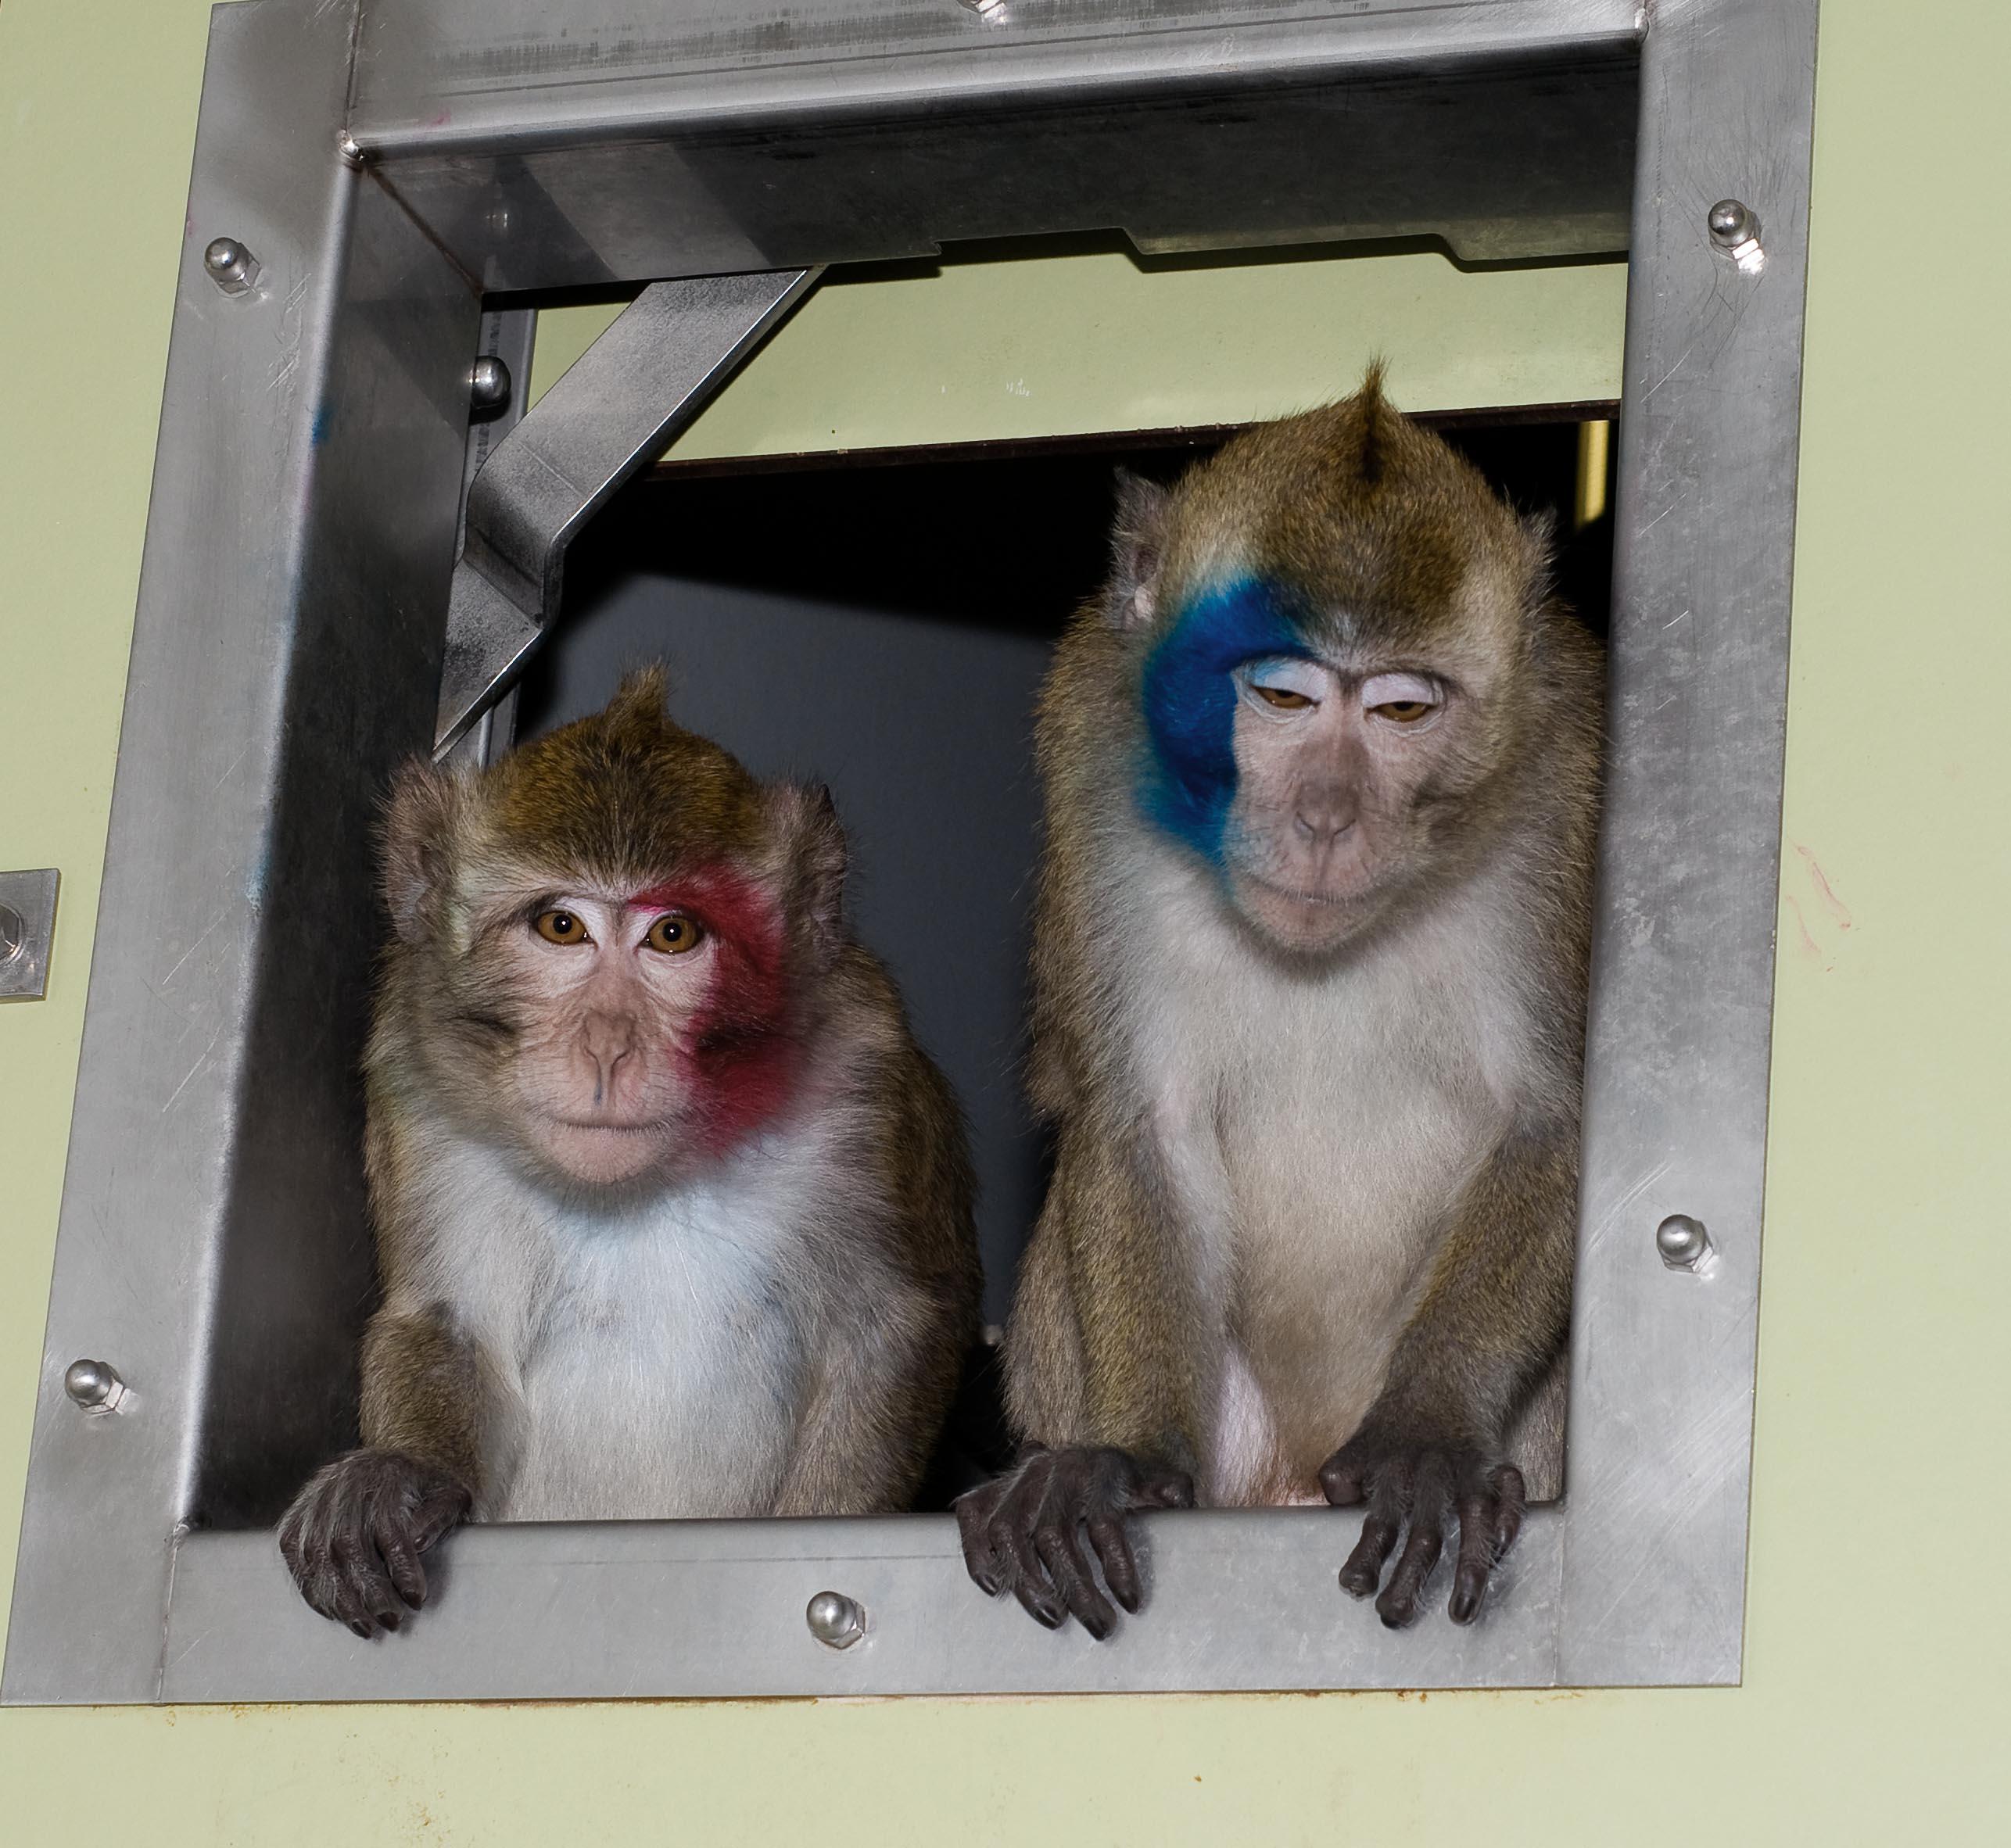 Two cynomolgus macaques with coloured dye on their faces. Dying of the face is not recommended given its role in communication.